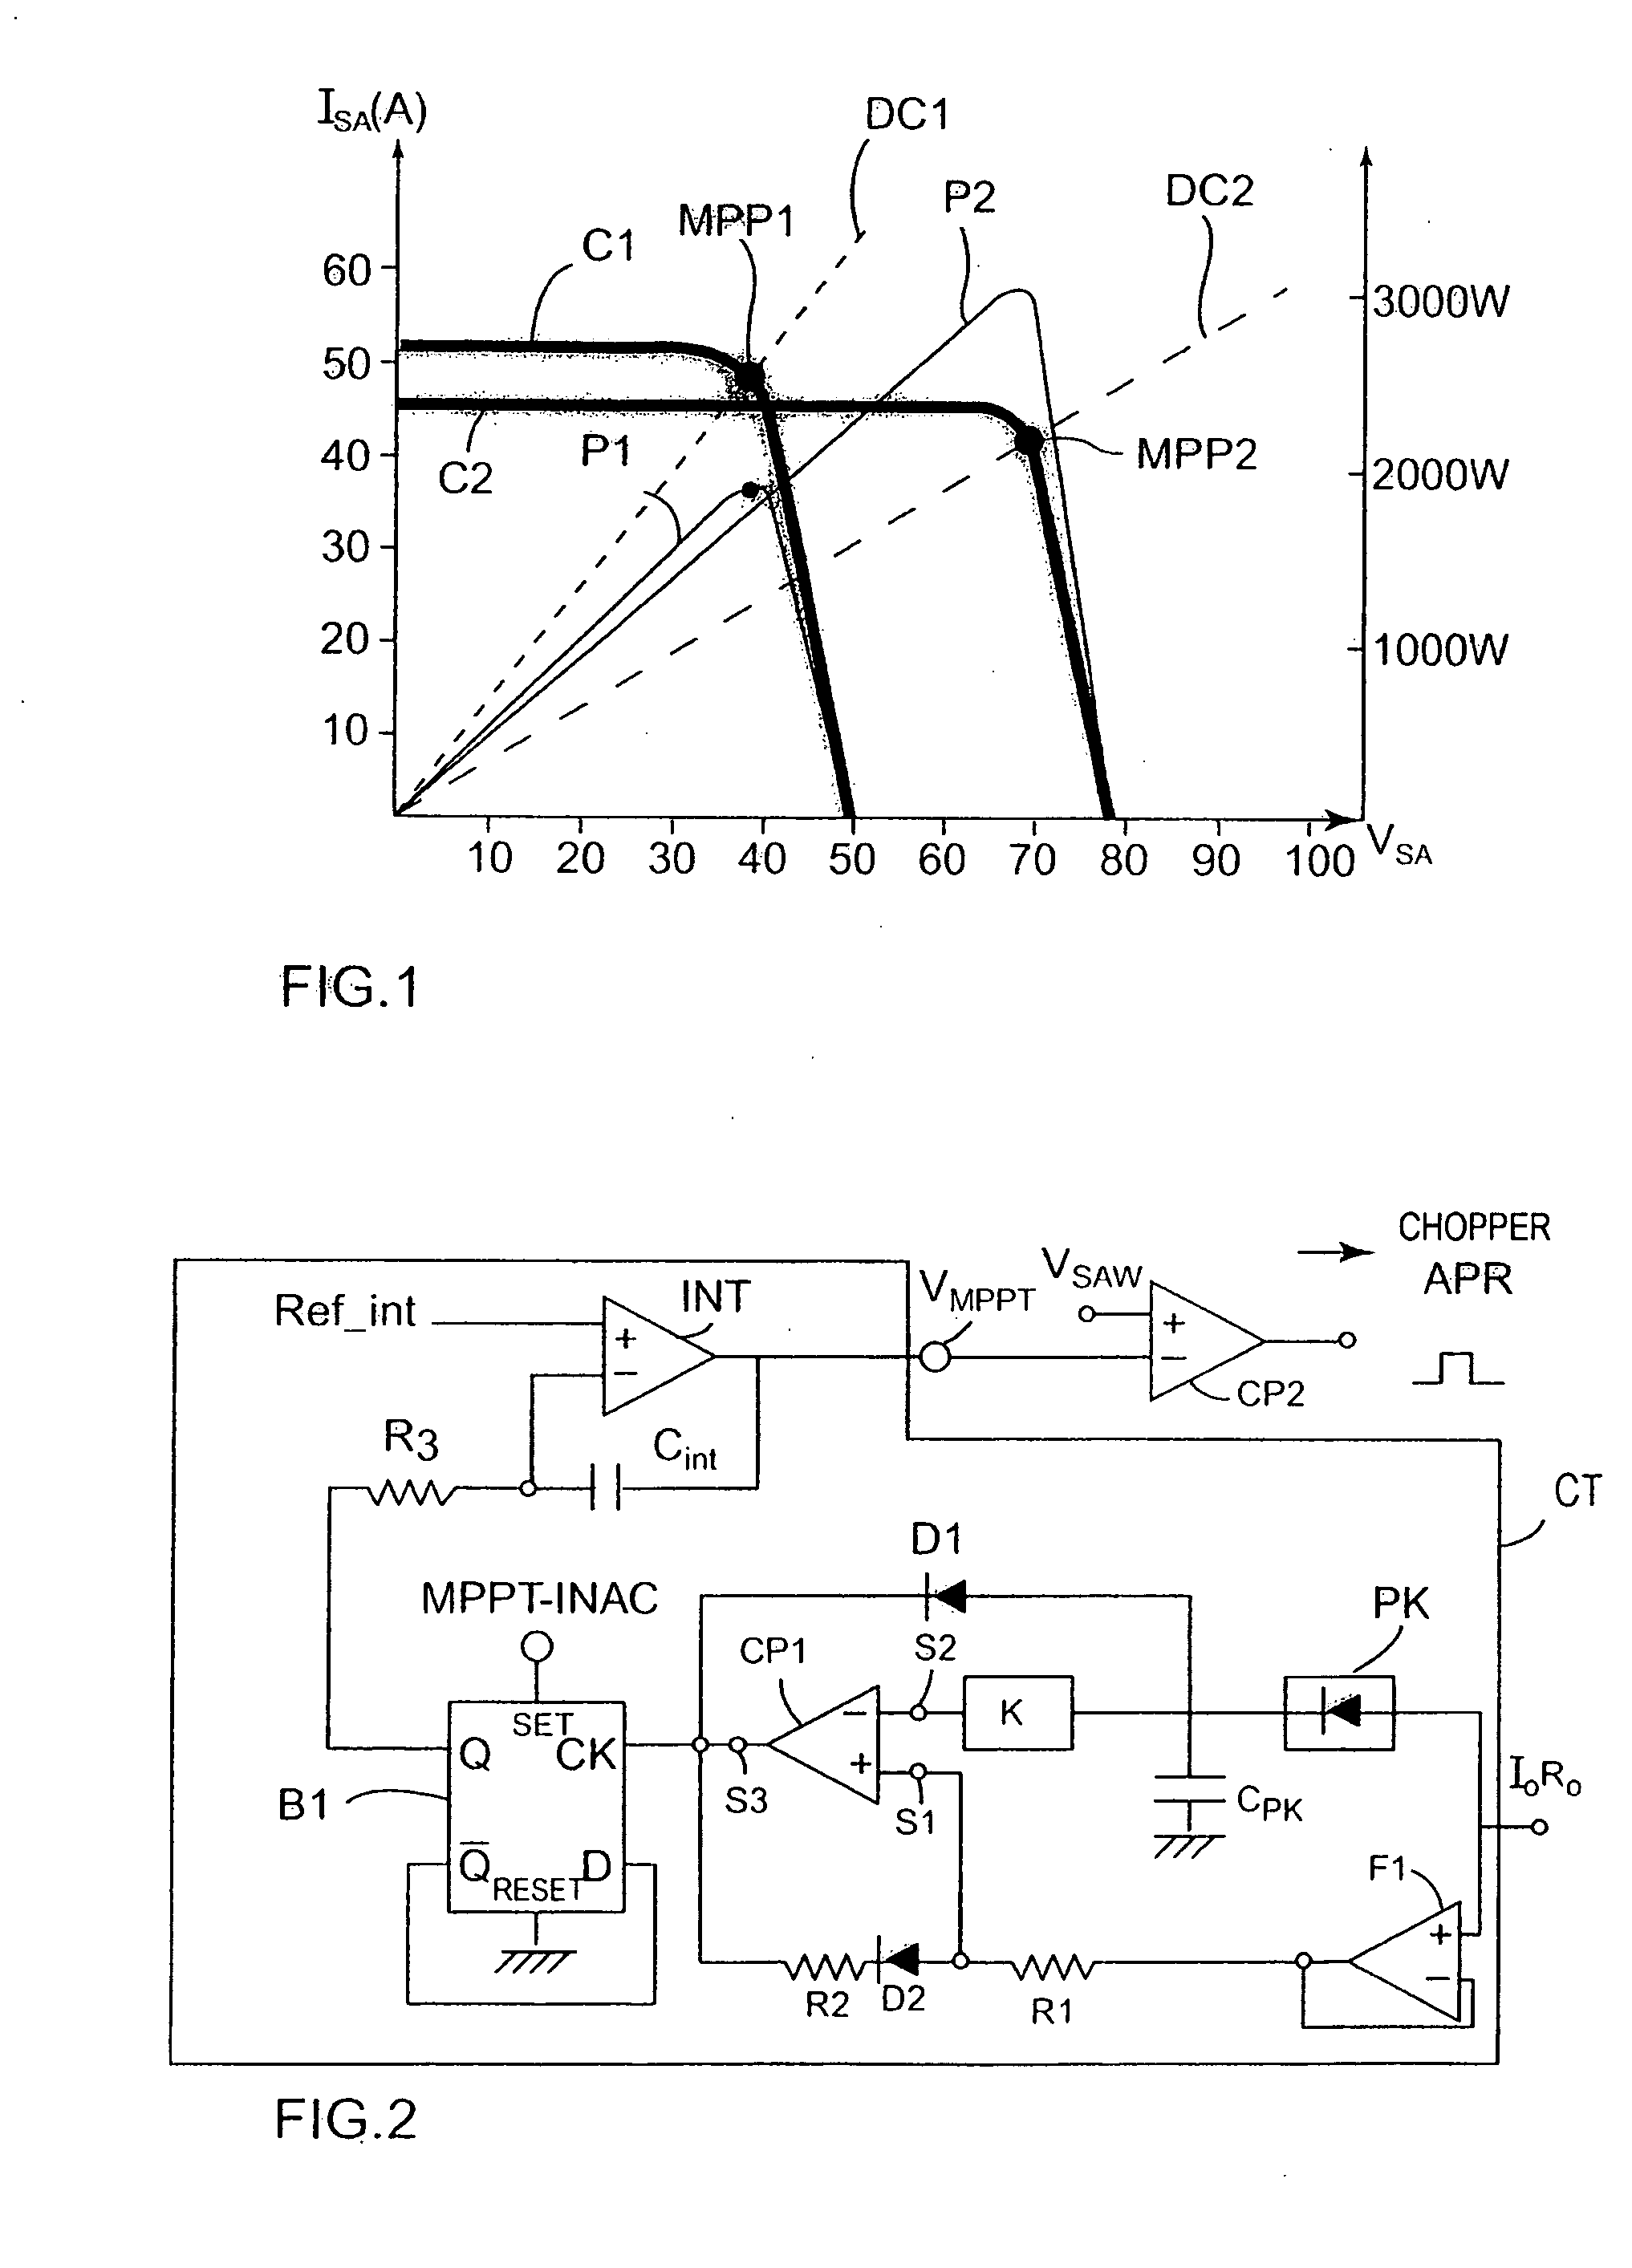 Control circuit for a DC-to-DC switching converter, and the use thereof for maximizing the power delivered by a photovoltaic generator